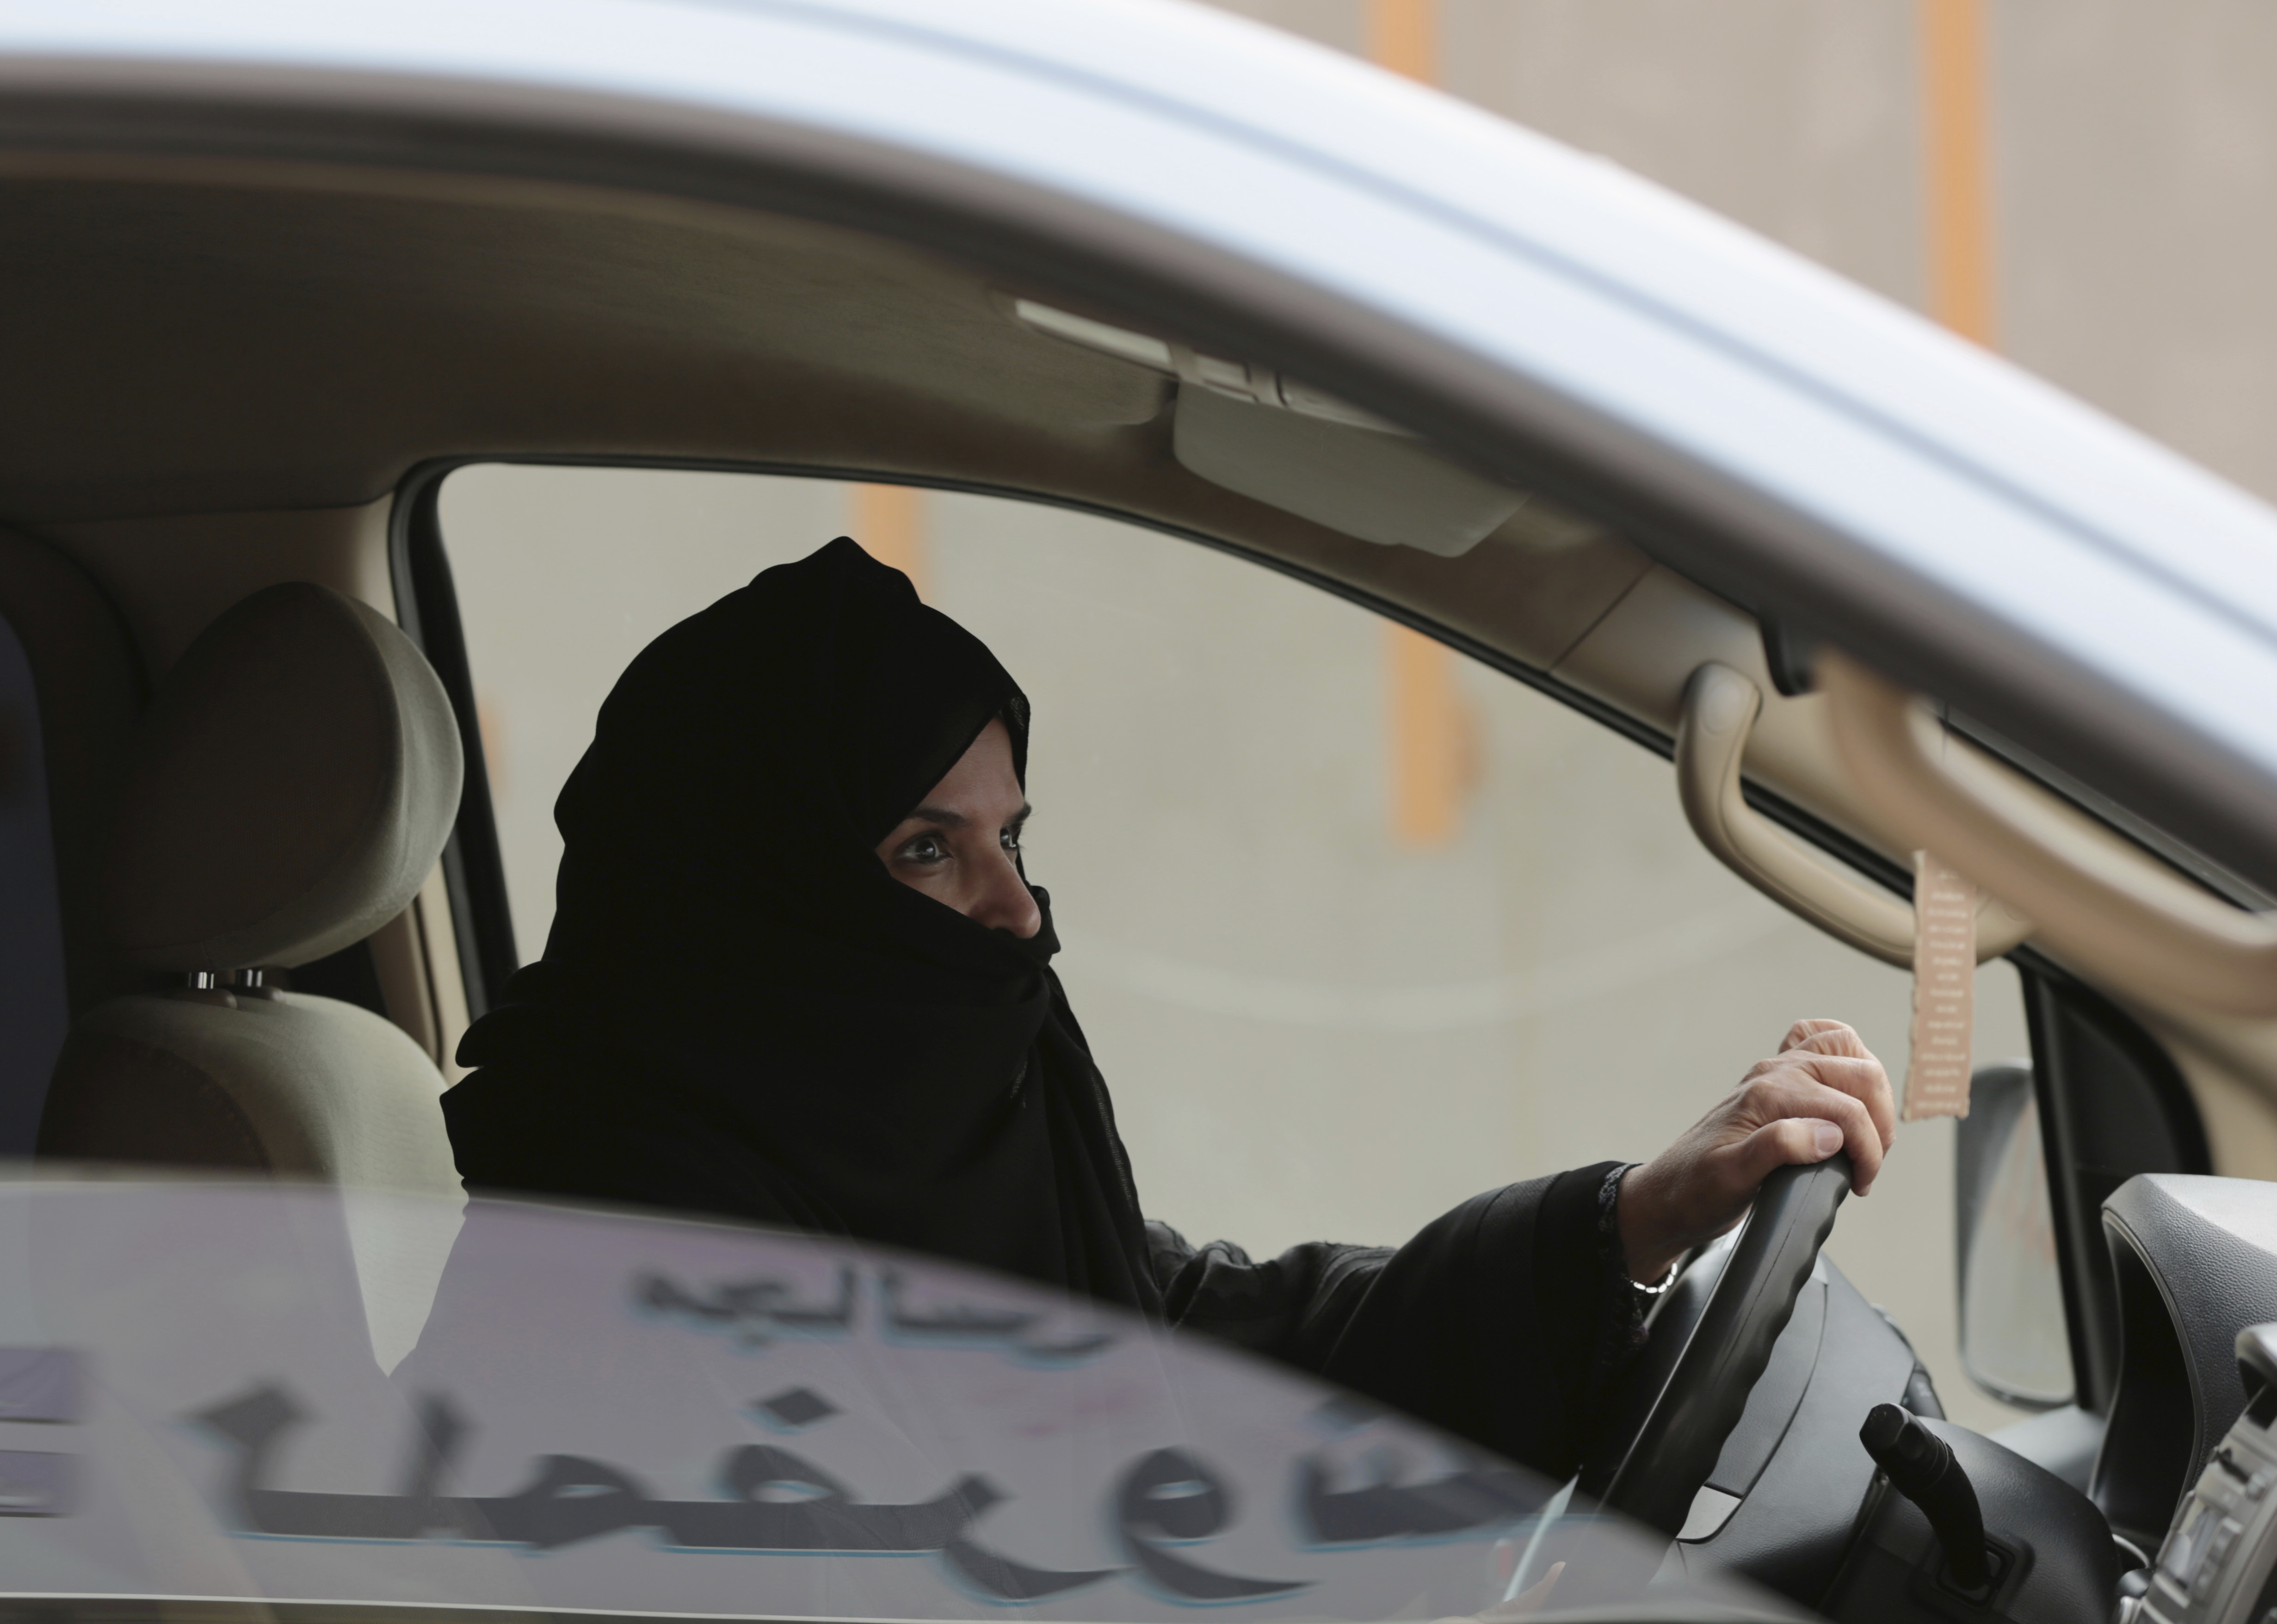 Aziza al-Yousef drives a car on a highway in Riyadh, Saudi Arabia, as part of a campaign to defy Saudi Arabia's then ban on women driving. 